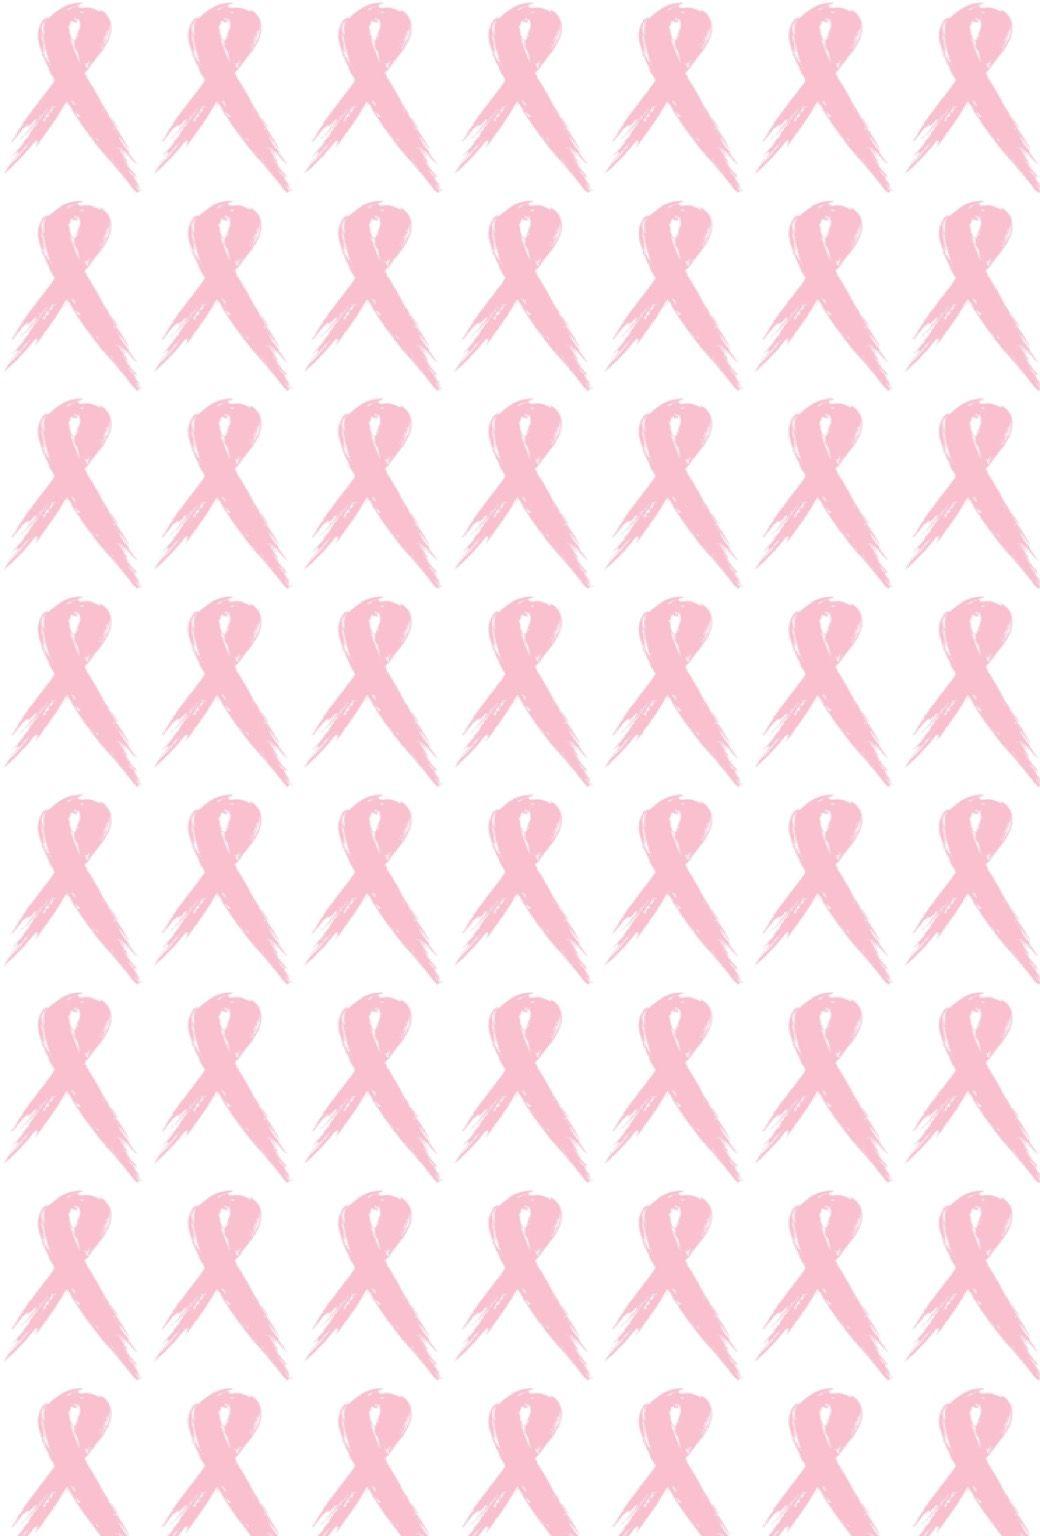 Breast Cancer Ribbon Iphone Wallpaper